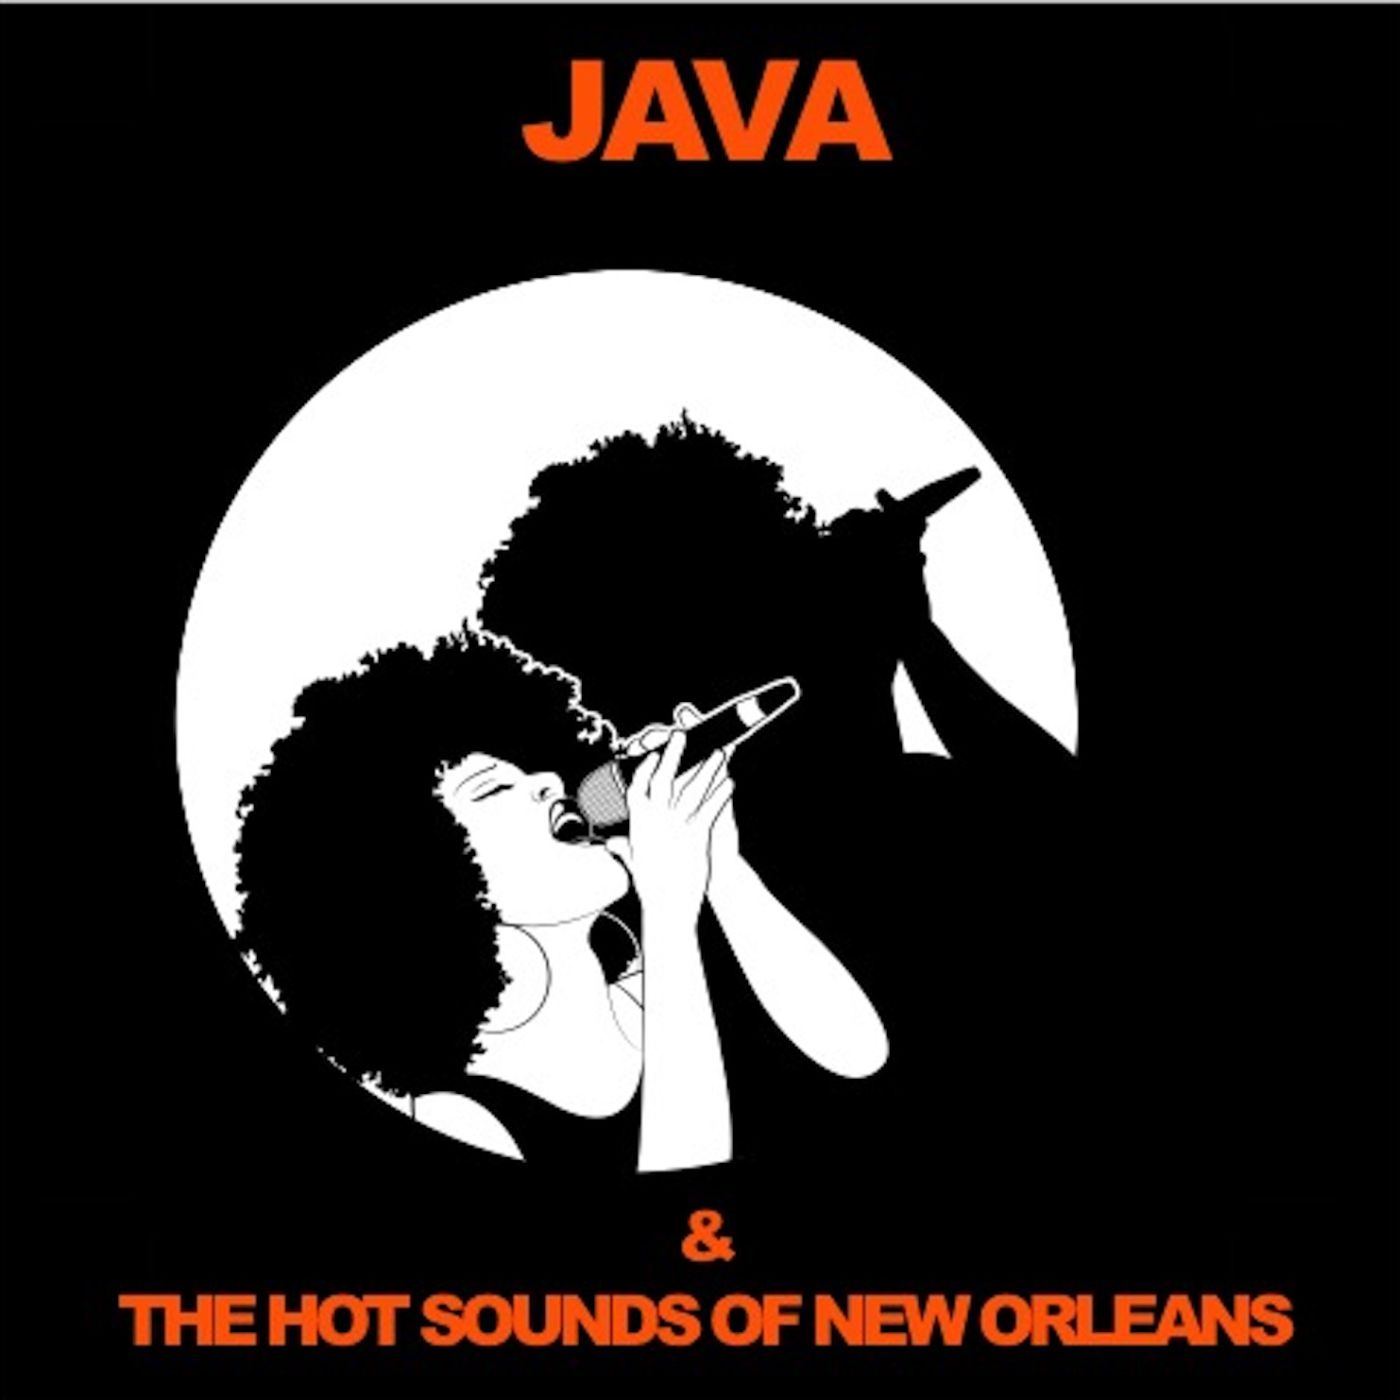 Java & The Hot Sounds of New Orleans